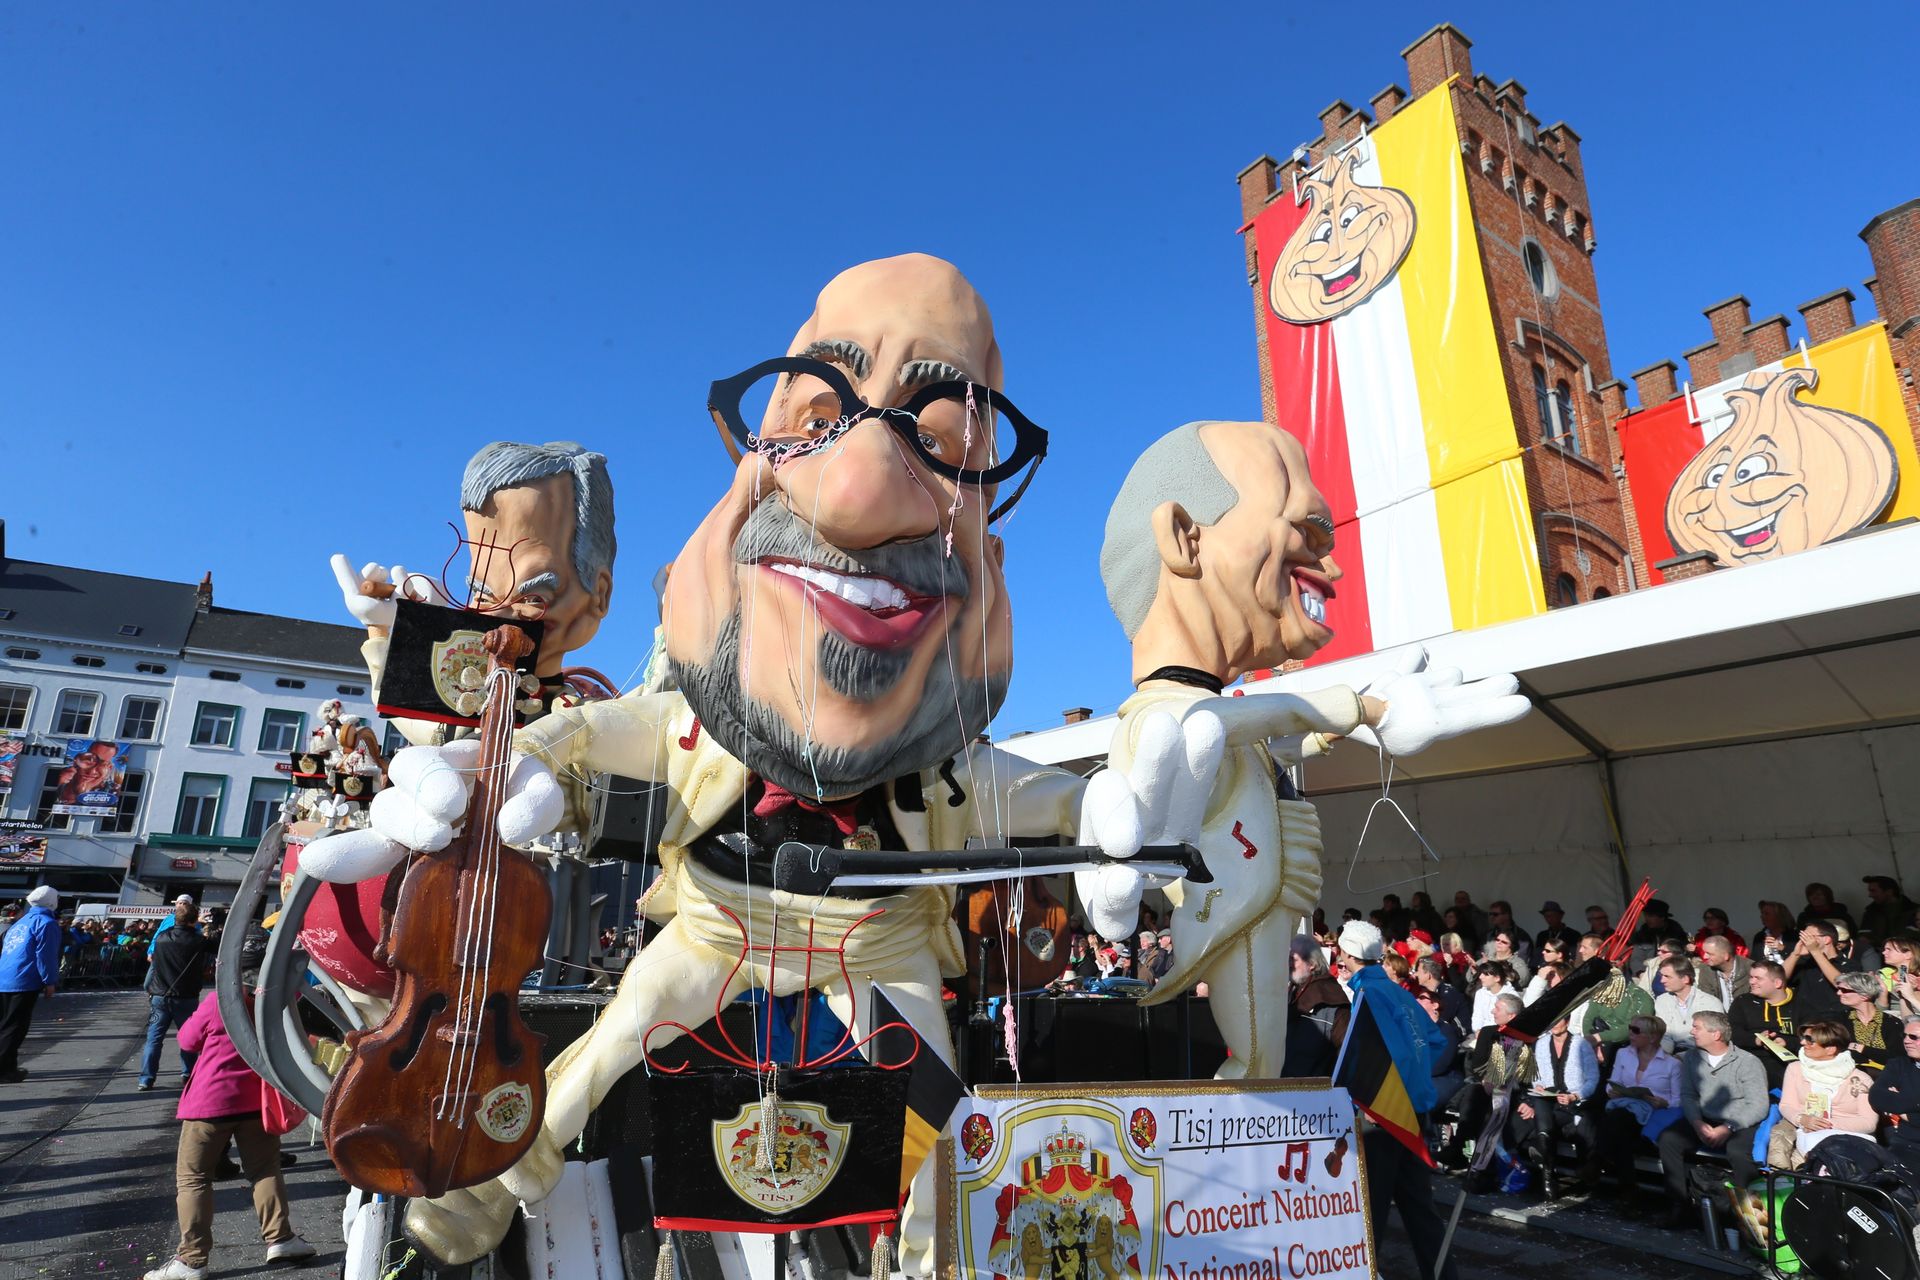 <p>Following very old traditiond, some parts of Belgium organize major festivities every year. Note the carnivals of Binche and Aalst, and the processional giants in many villages in the country – just like in northern France.</p>